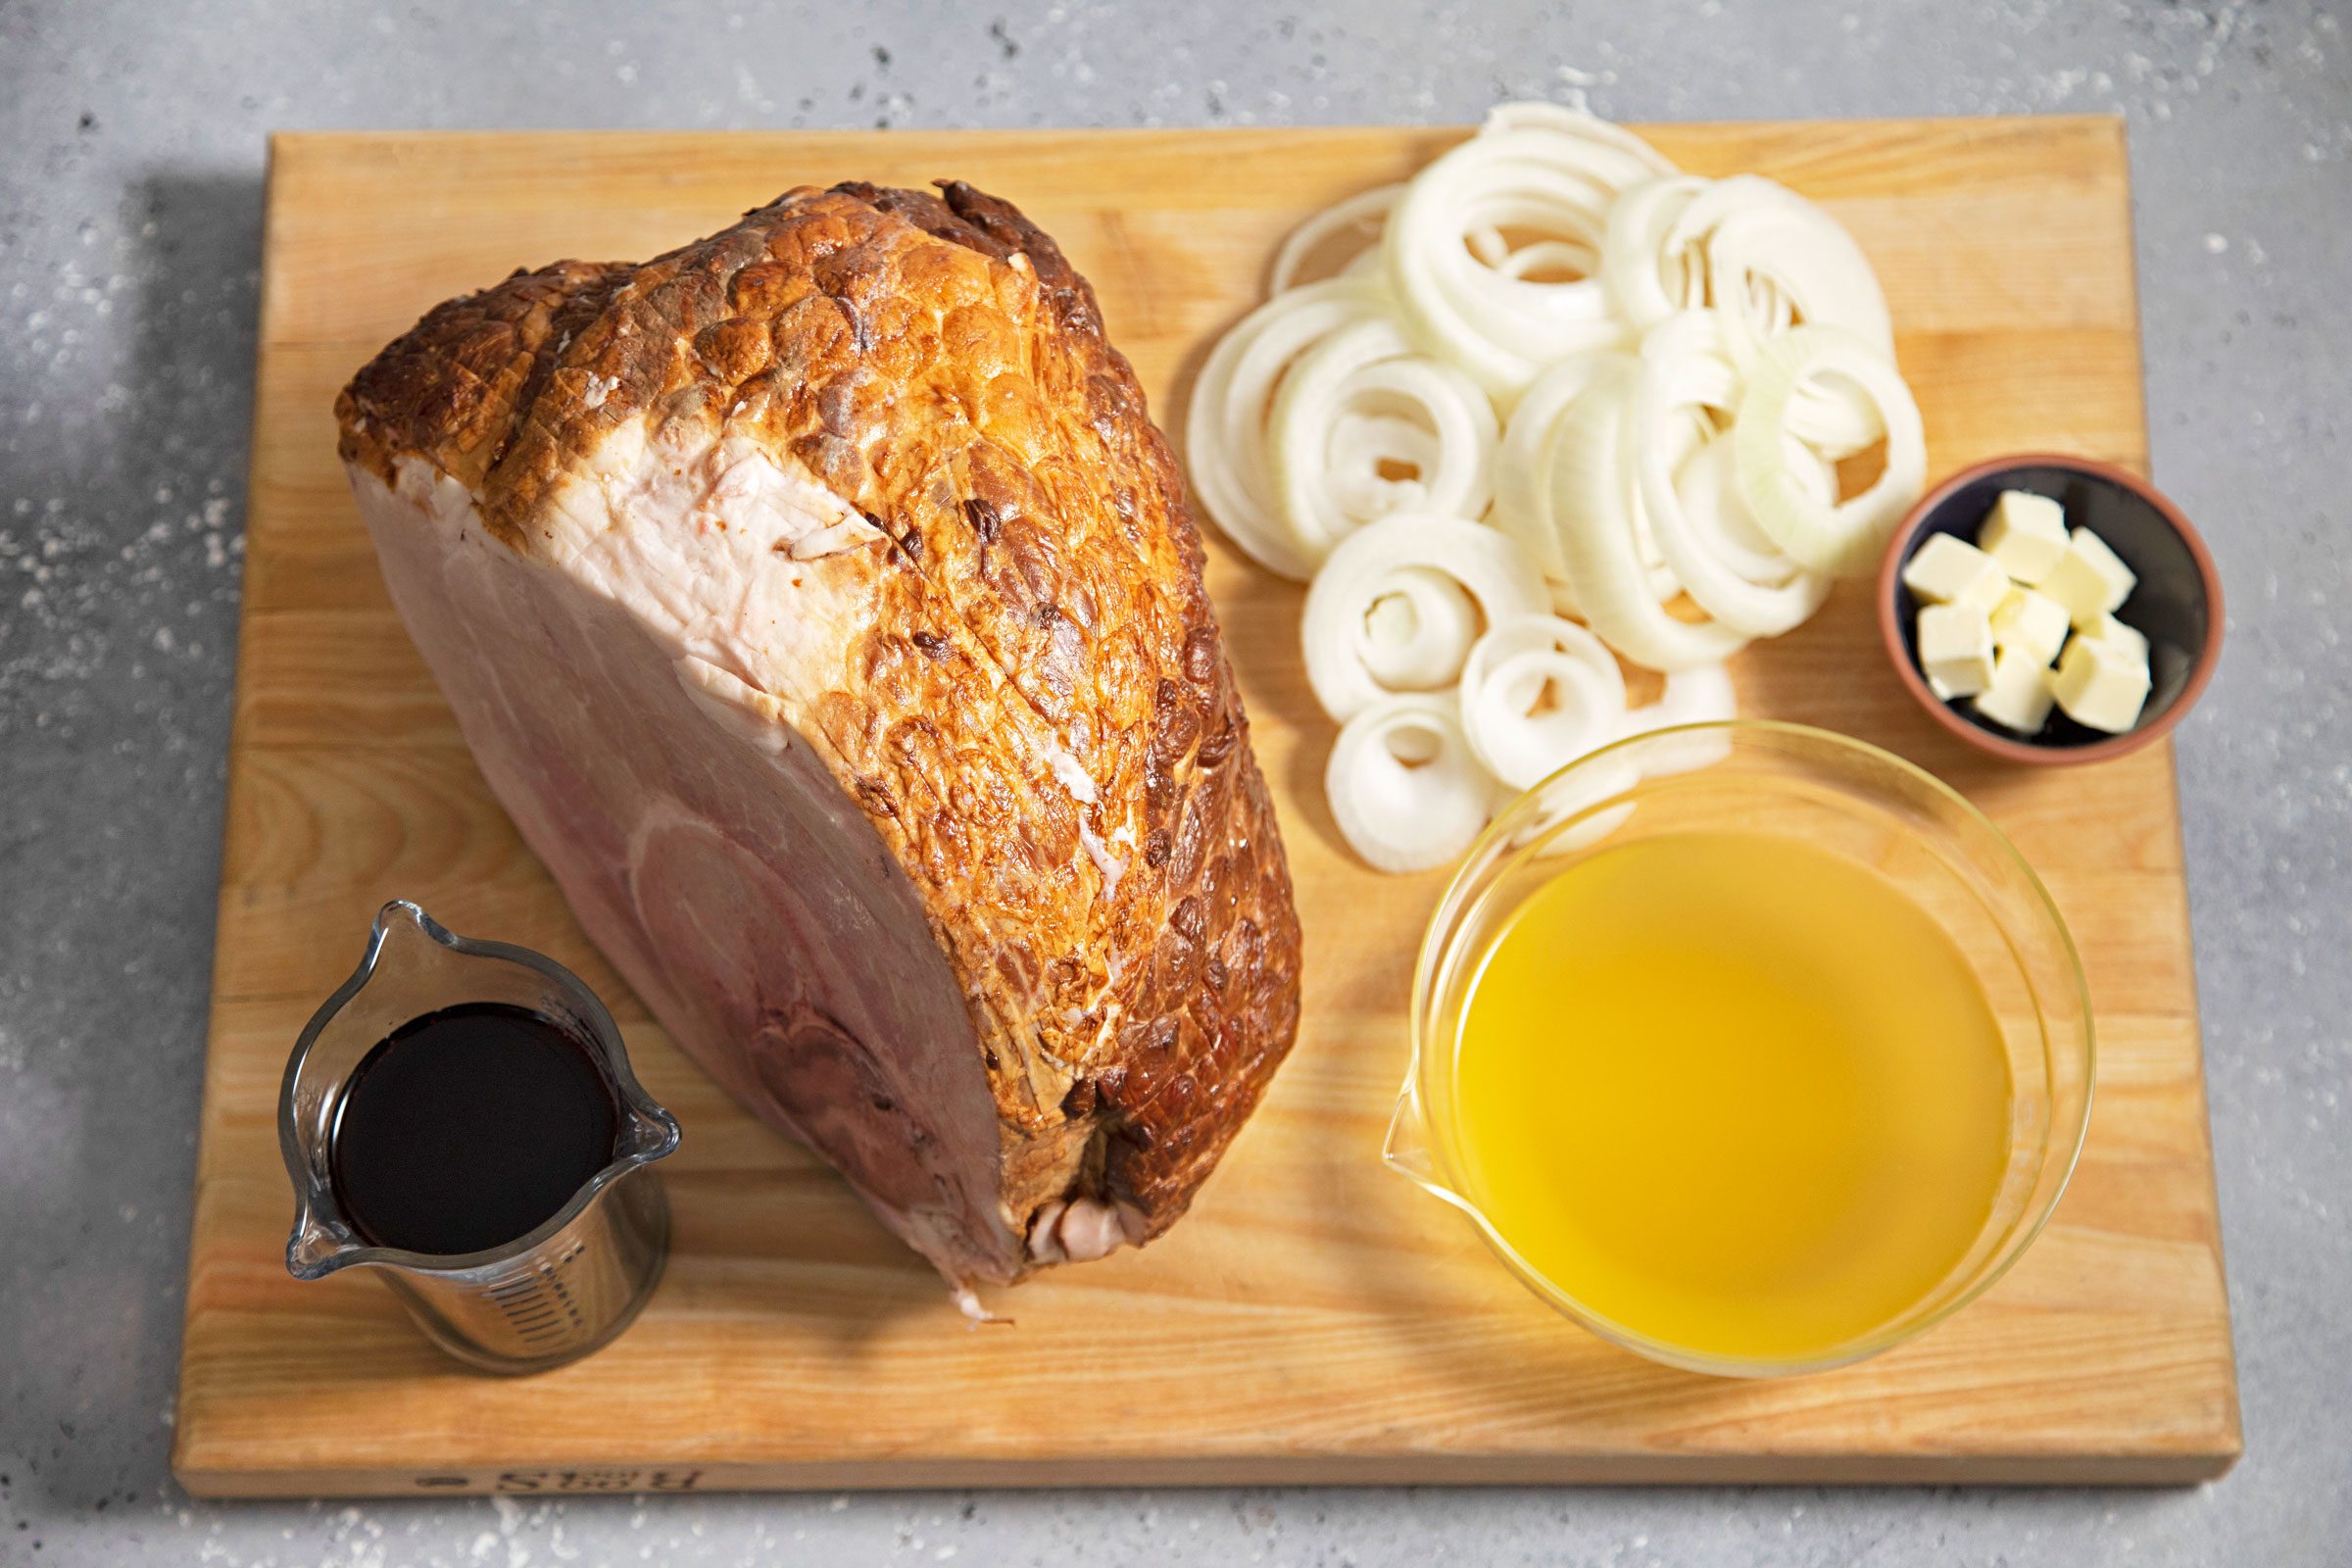 ingredients for Baked Spiral Ham on a wooden cutting board